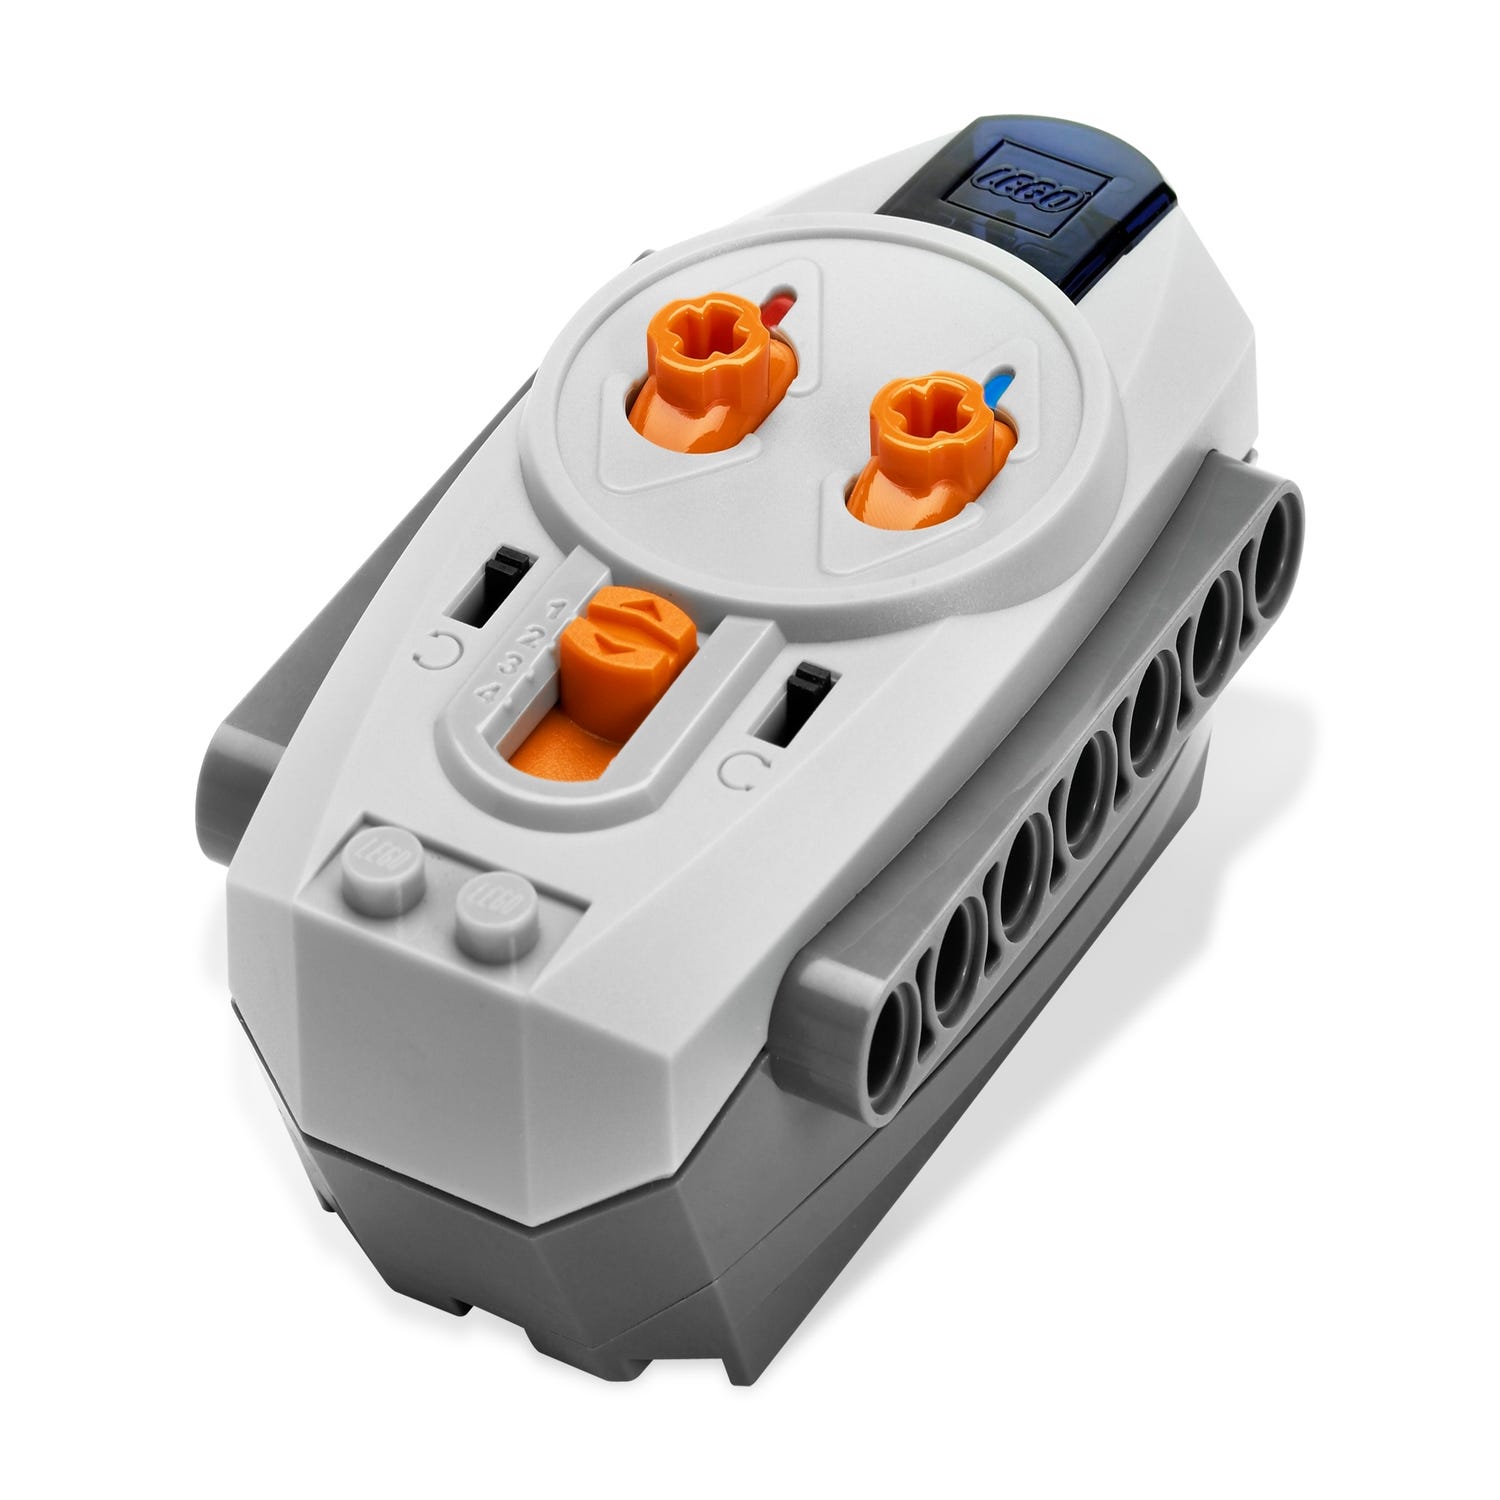 LEGO® Power Functions IR Remote Control 8885 Buy at the Official LEGO® Shop US